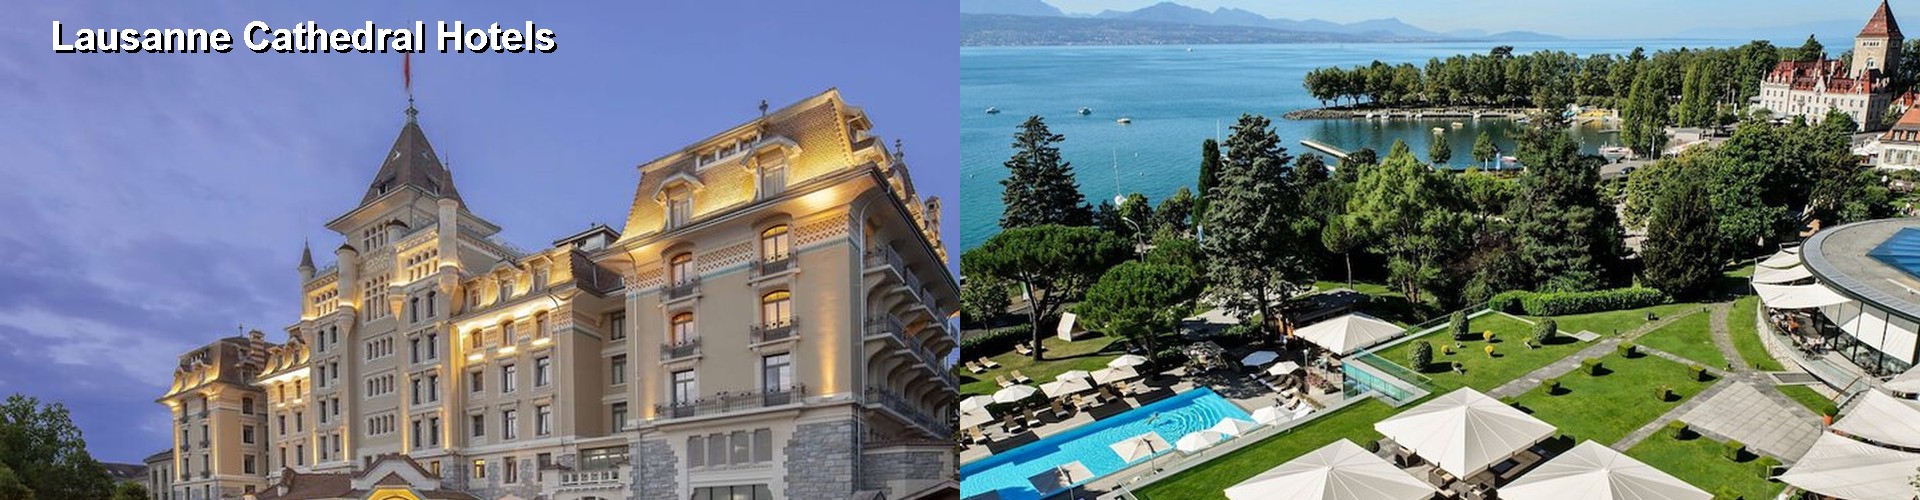 5 Best Hotels near Lausanne Cathedral